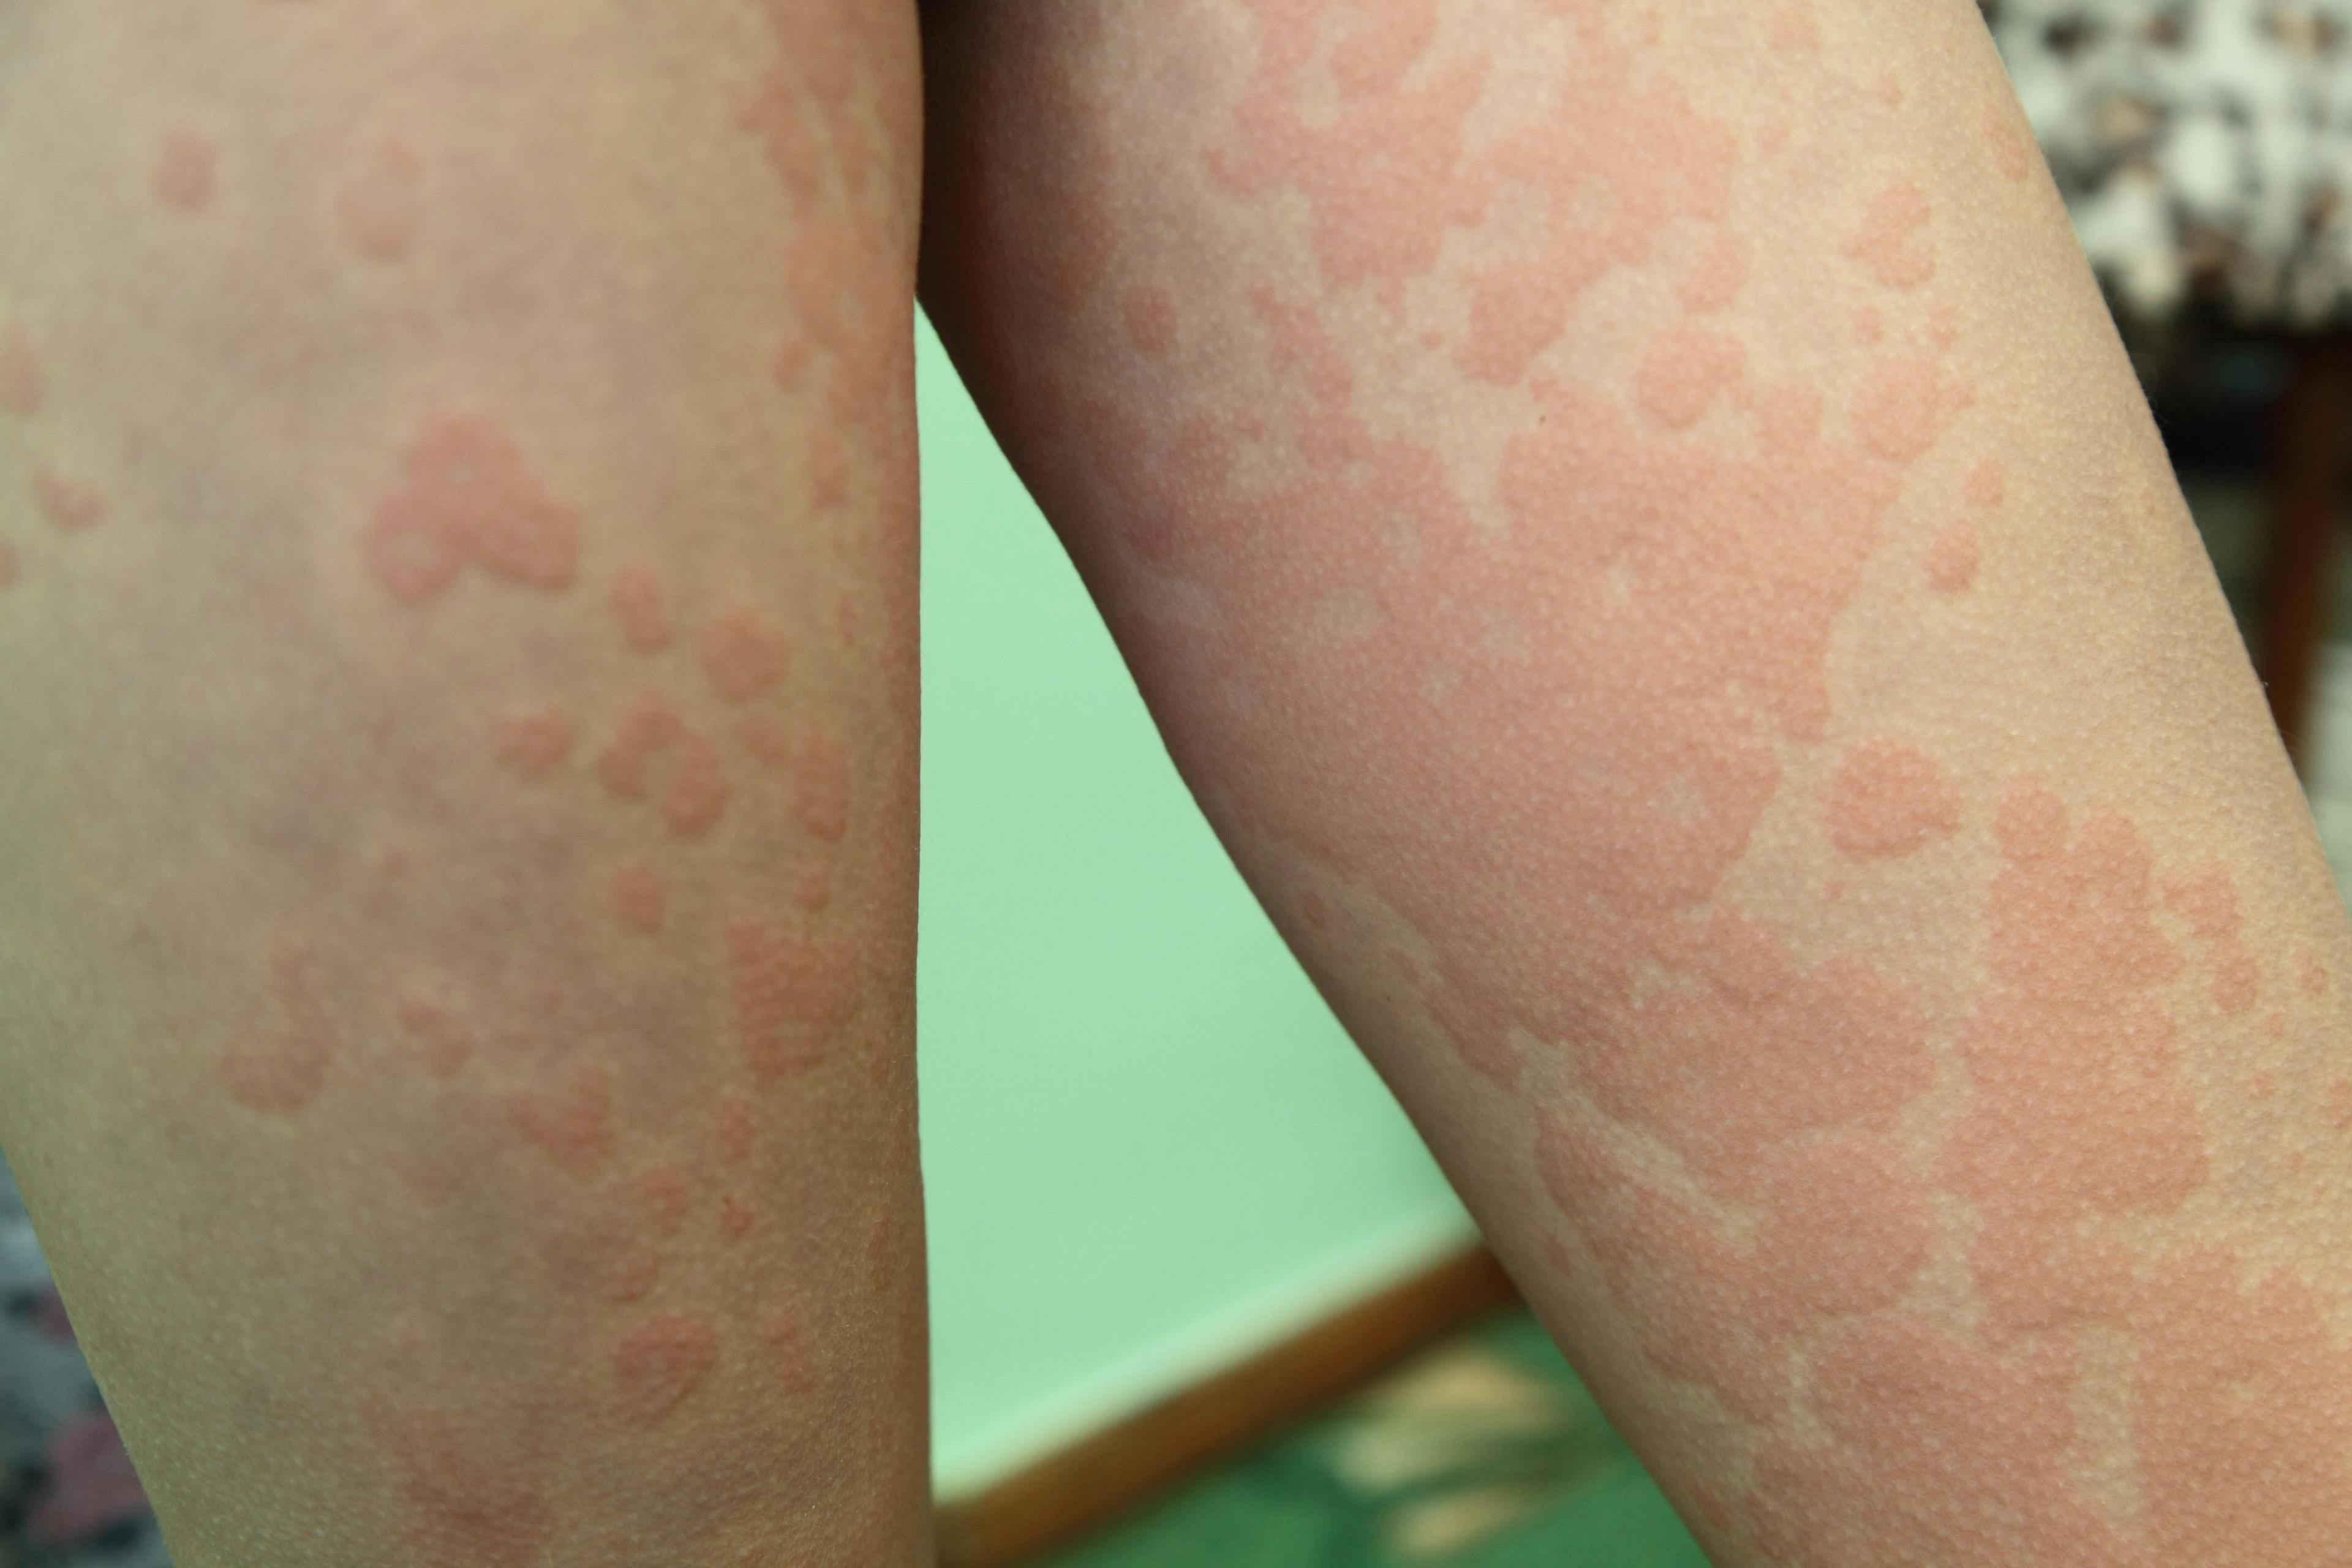 Japan Approves Dupilumab for Chronic Spontaneous Urticaria